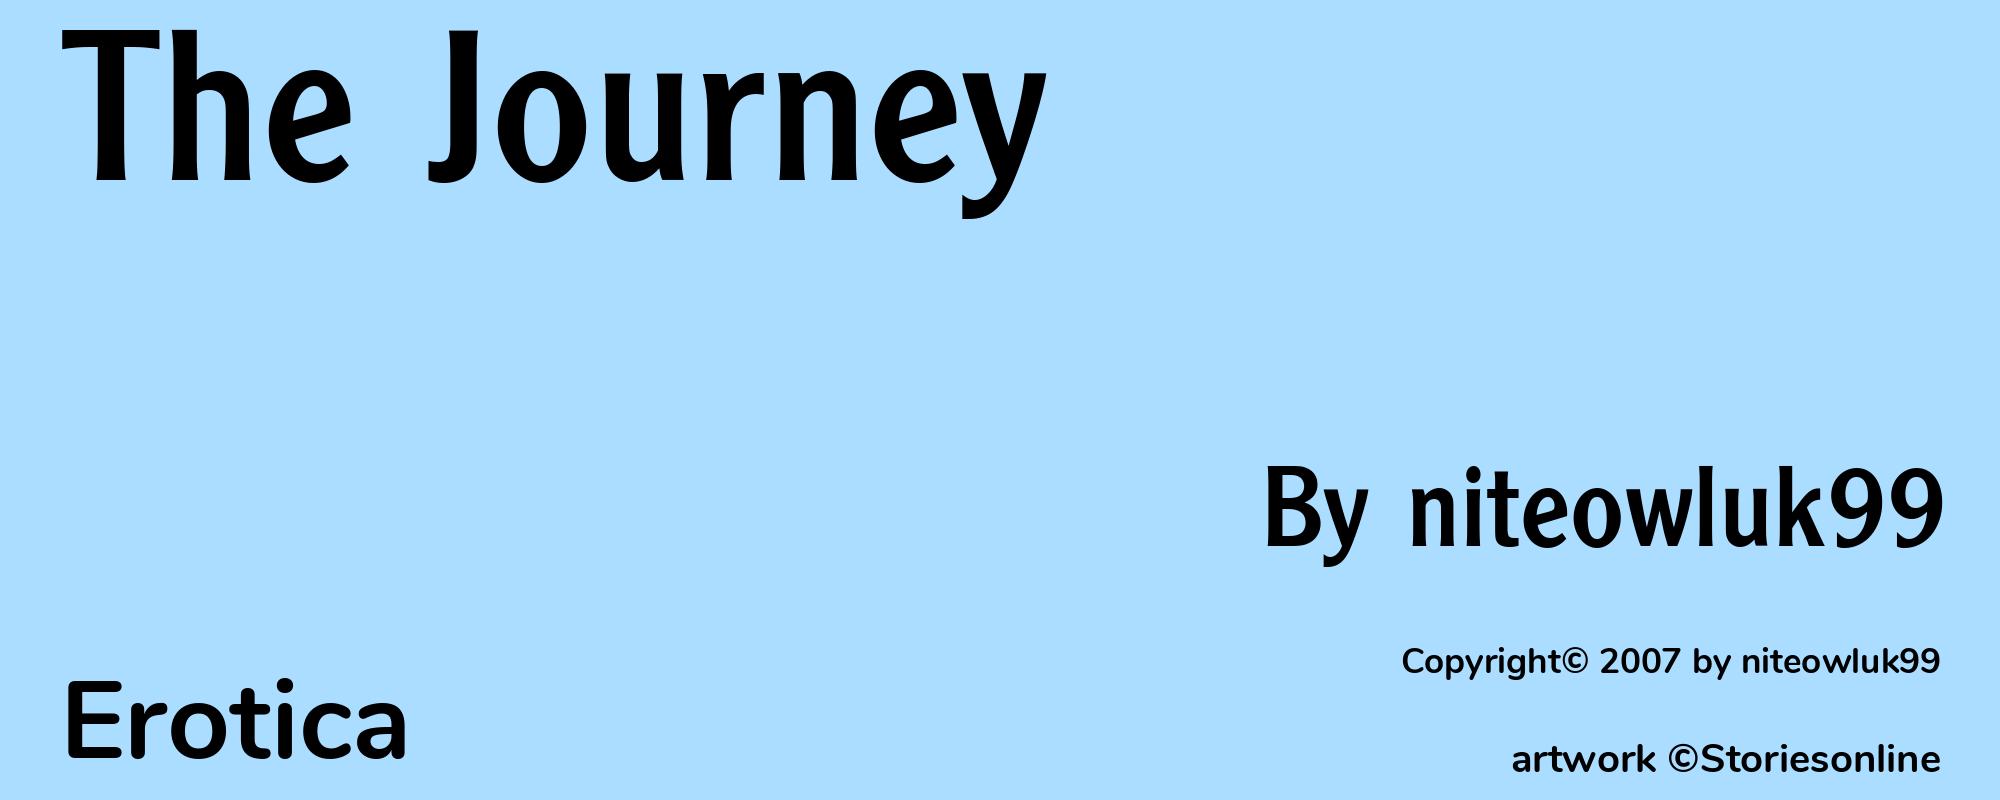 The Journey - Cover